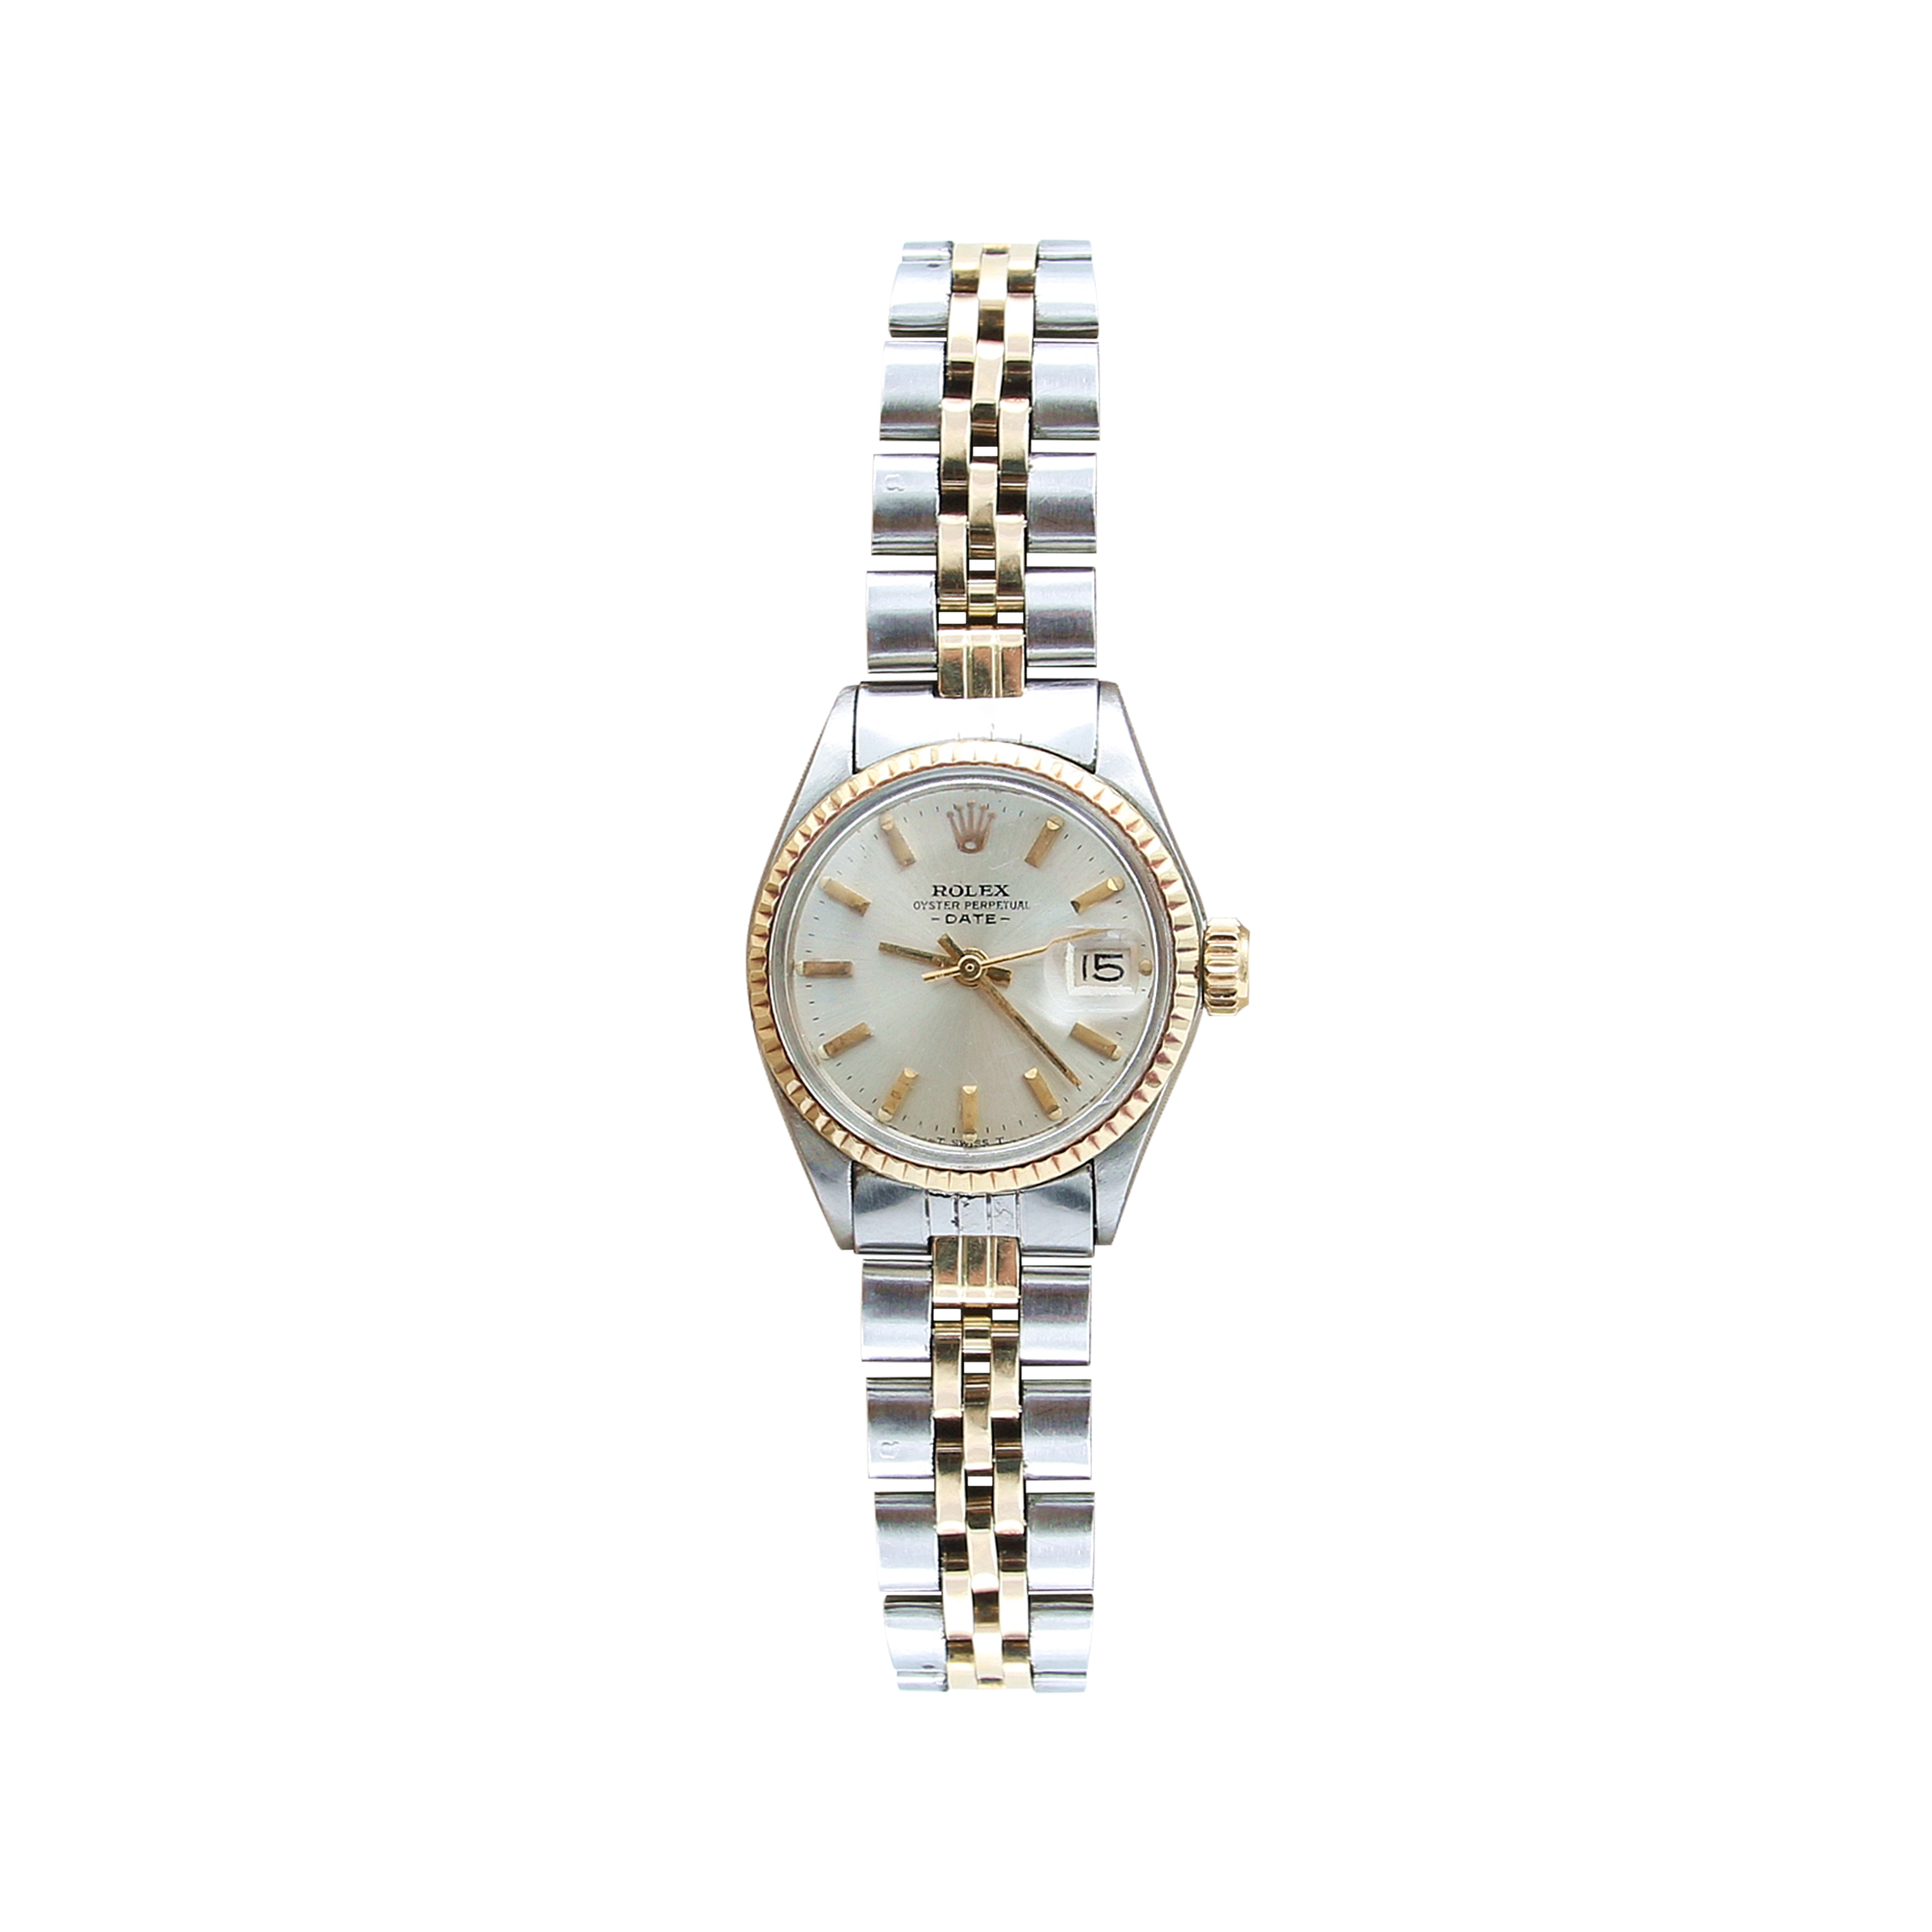 Rolex Oyster Perpetual Lady Date ref. 6517 Steel/Gold - Silver Dial